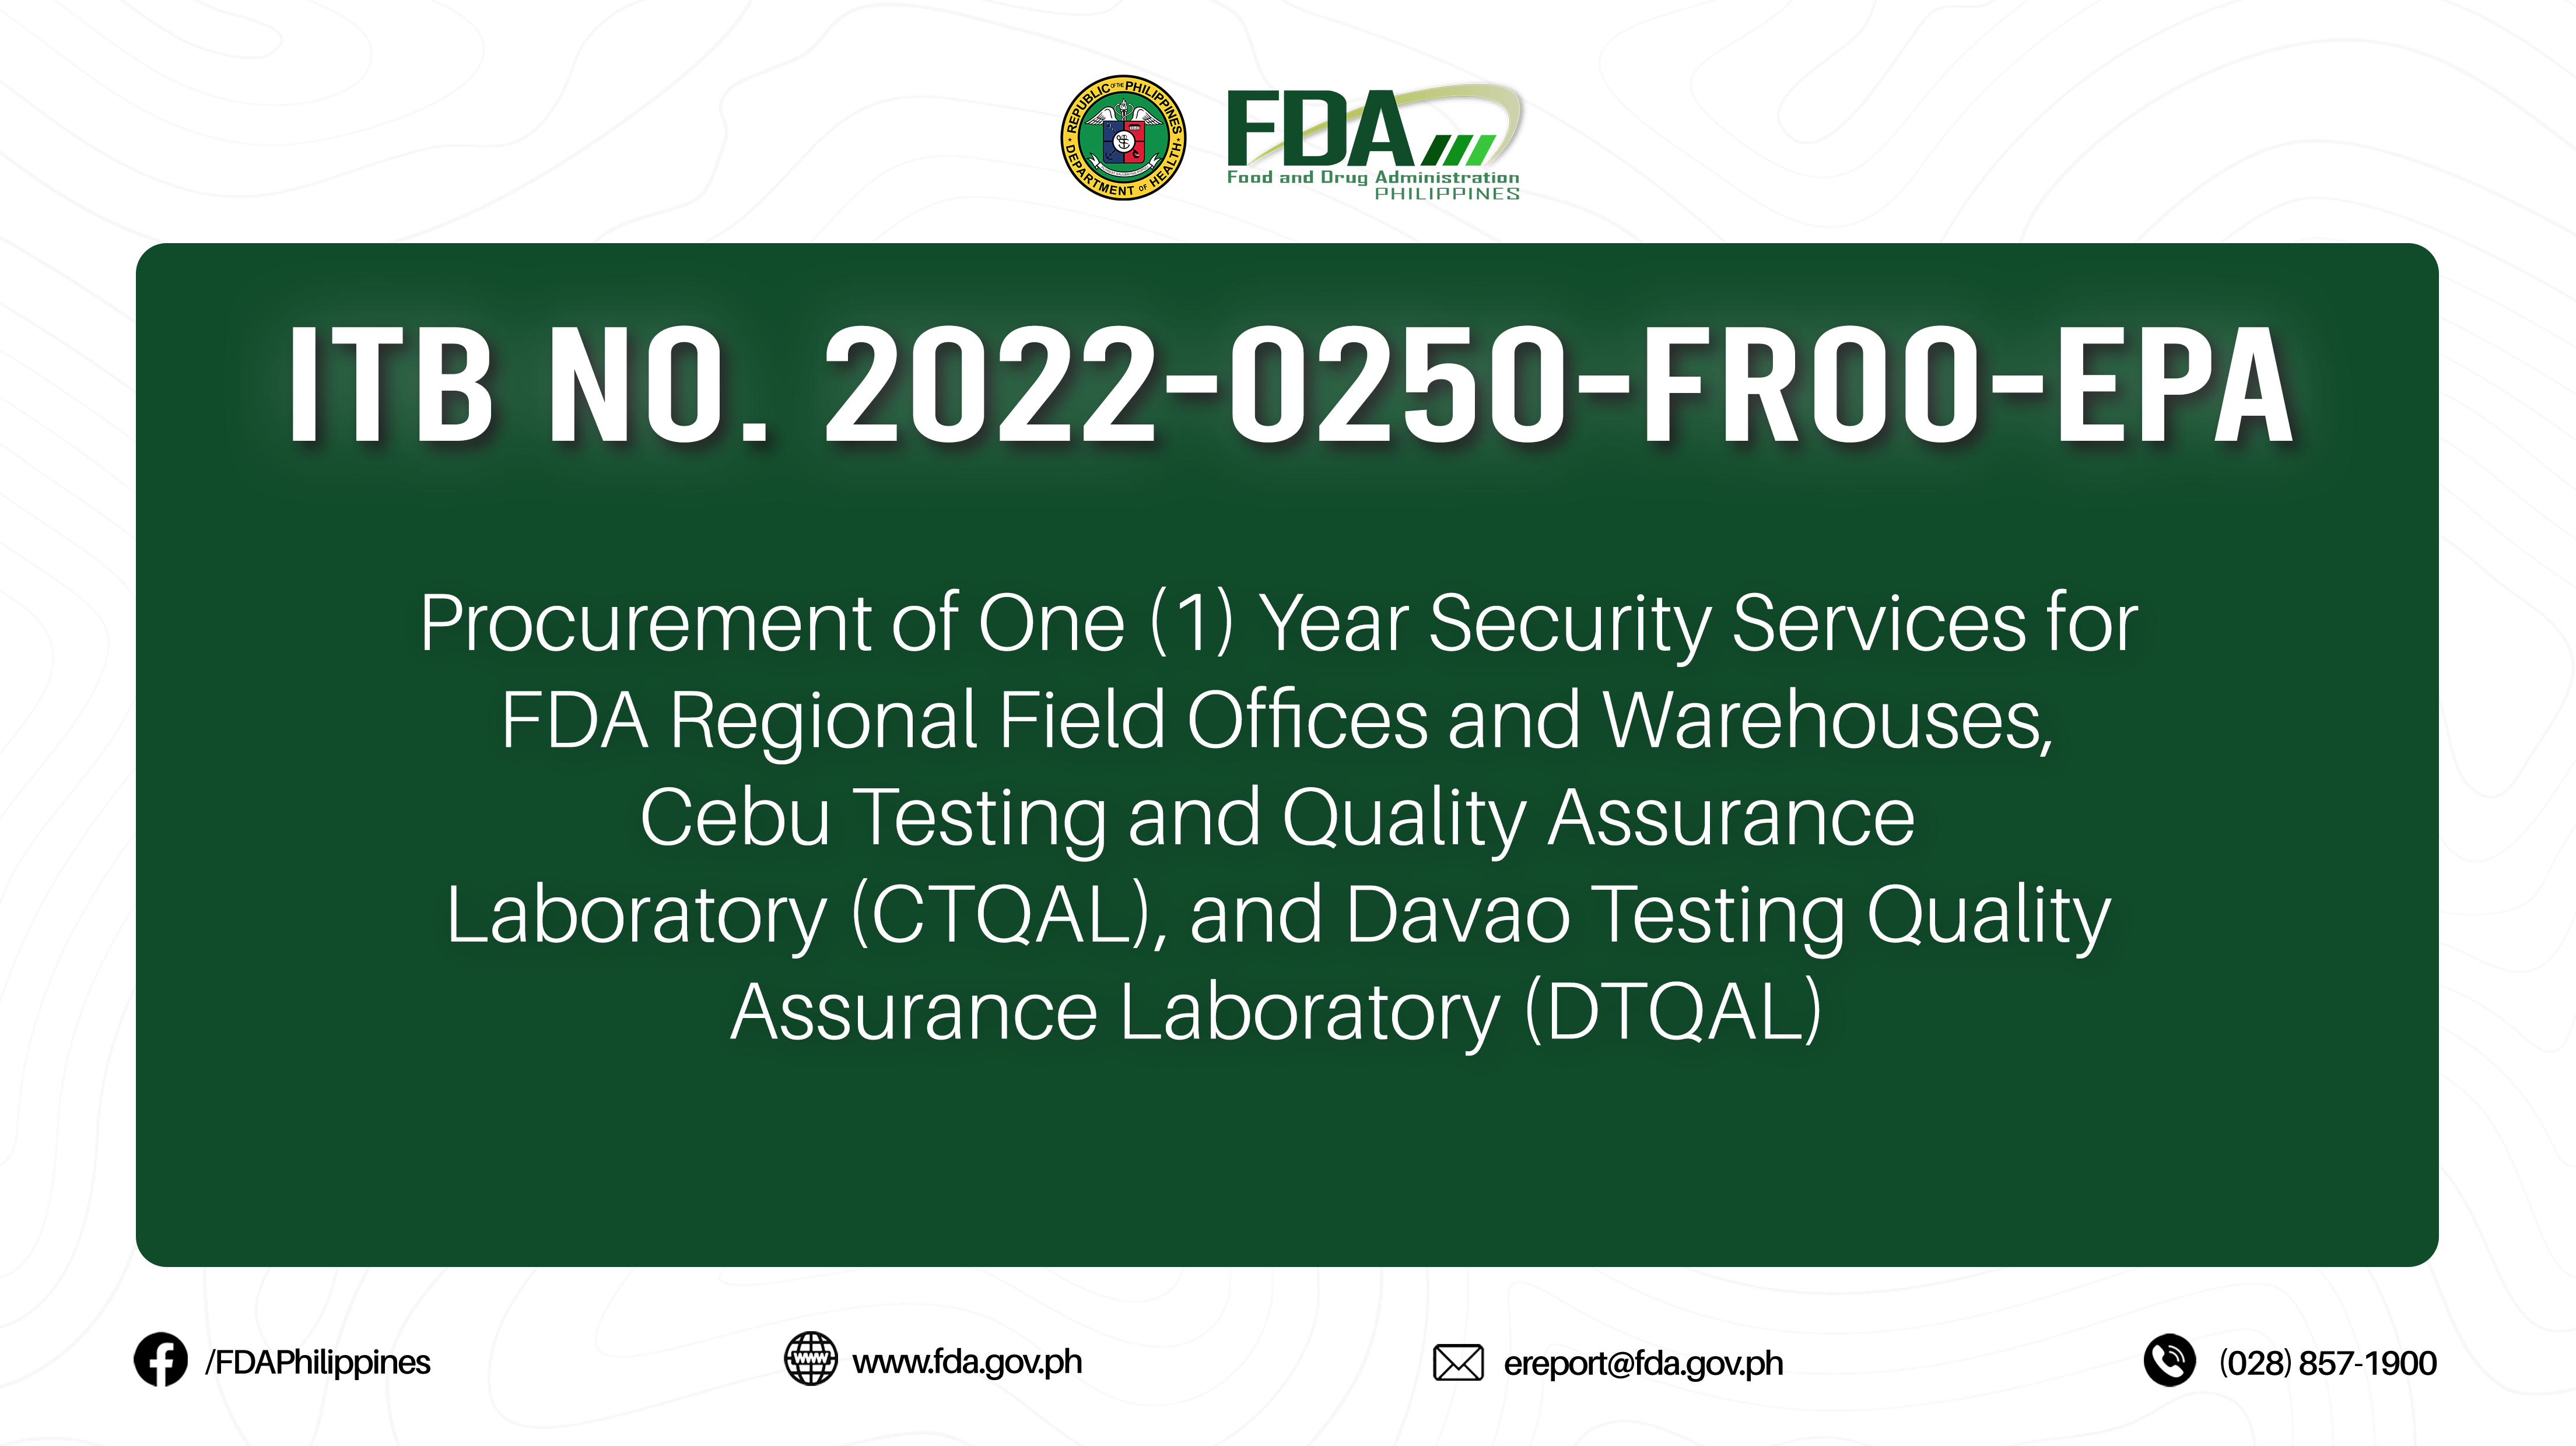 ITB No. 2022-0250-FROO-EPA || Procurement of One (1) Year Security Services for FDA Regional Field Offices and Warehouses, Cebu Testing and Quality Assurance Laboratory (CTQAL), and Davao Testing Quality Assurance Laboratory (DTQAL)